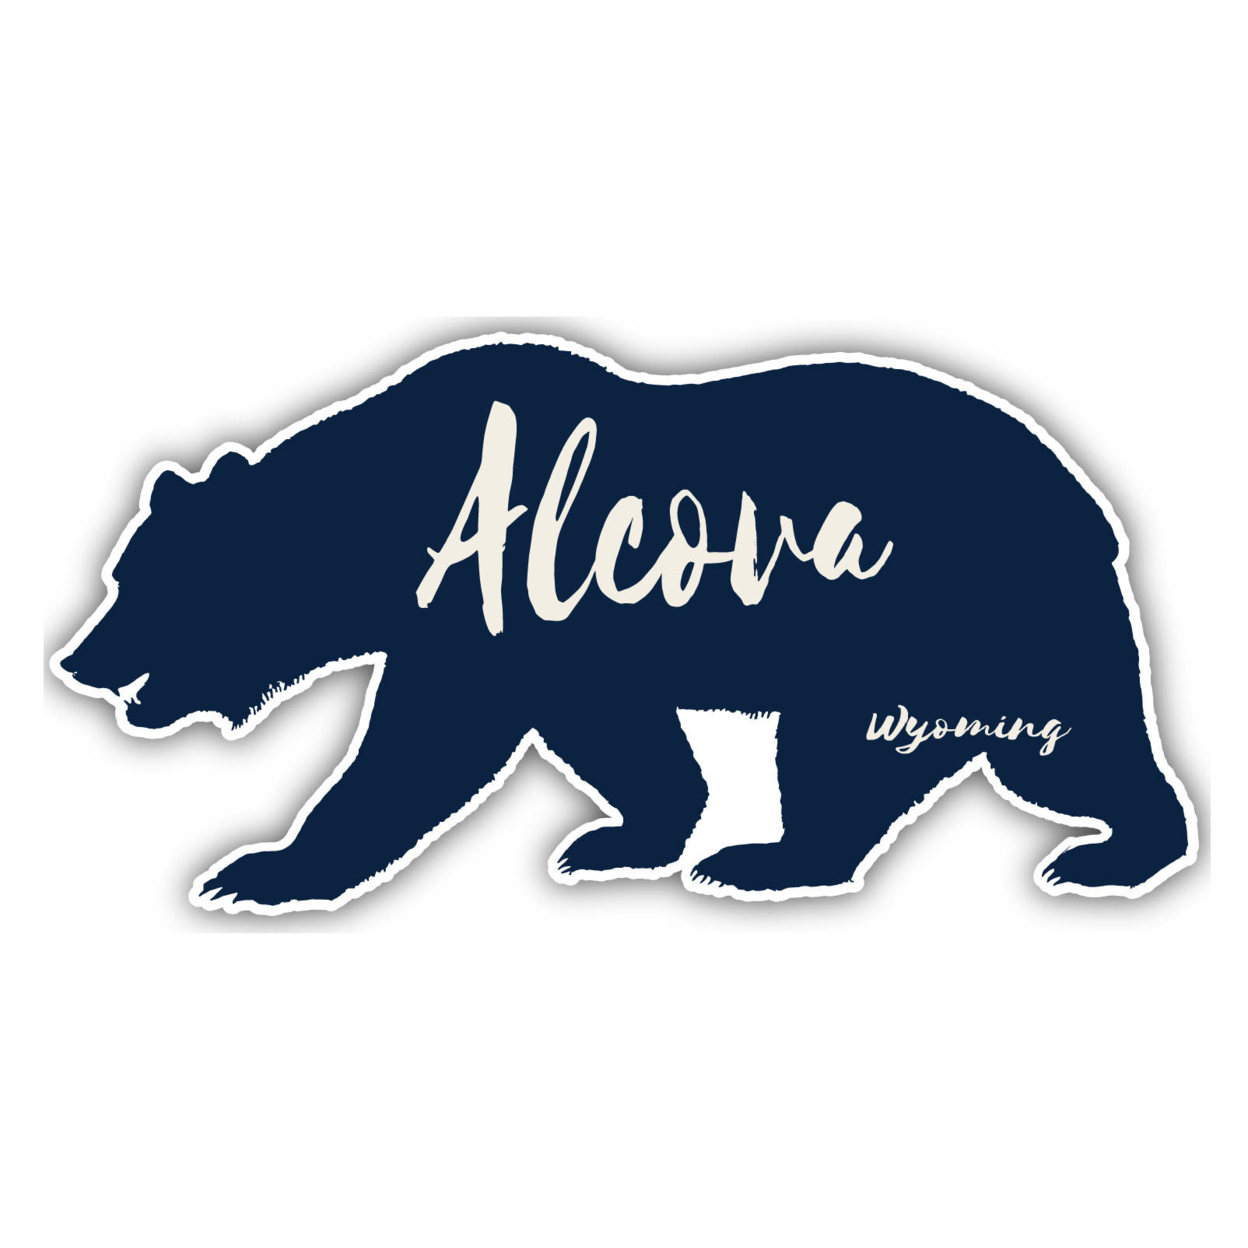 Alcova Wyoming Souvenir Decorative Stickers (Choose Theme And Size) - 4-Pack, 12-Inch, Tent